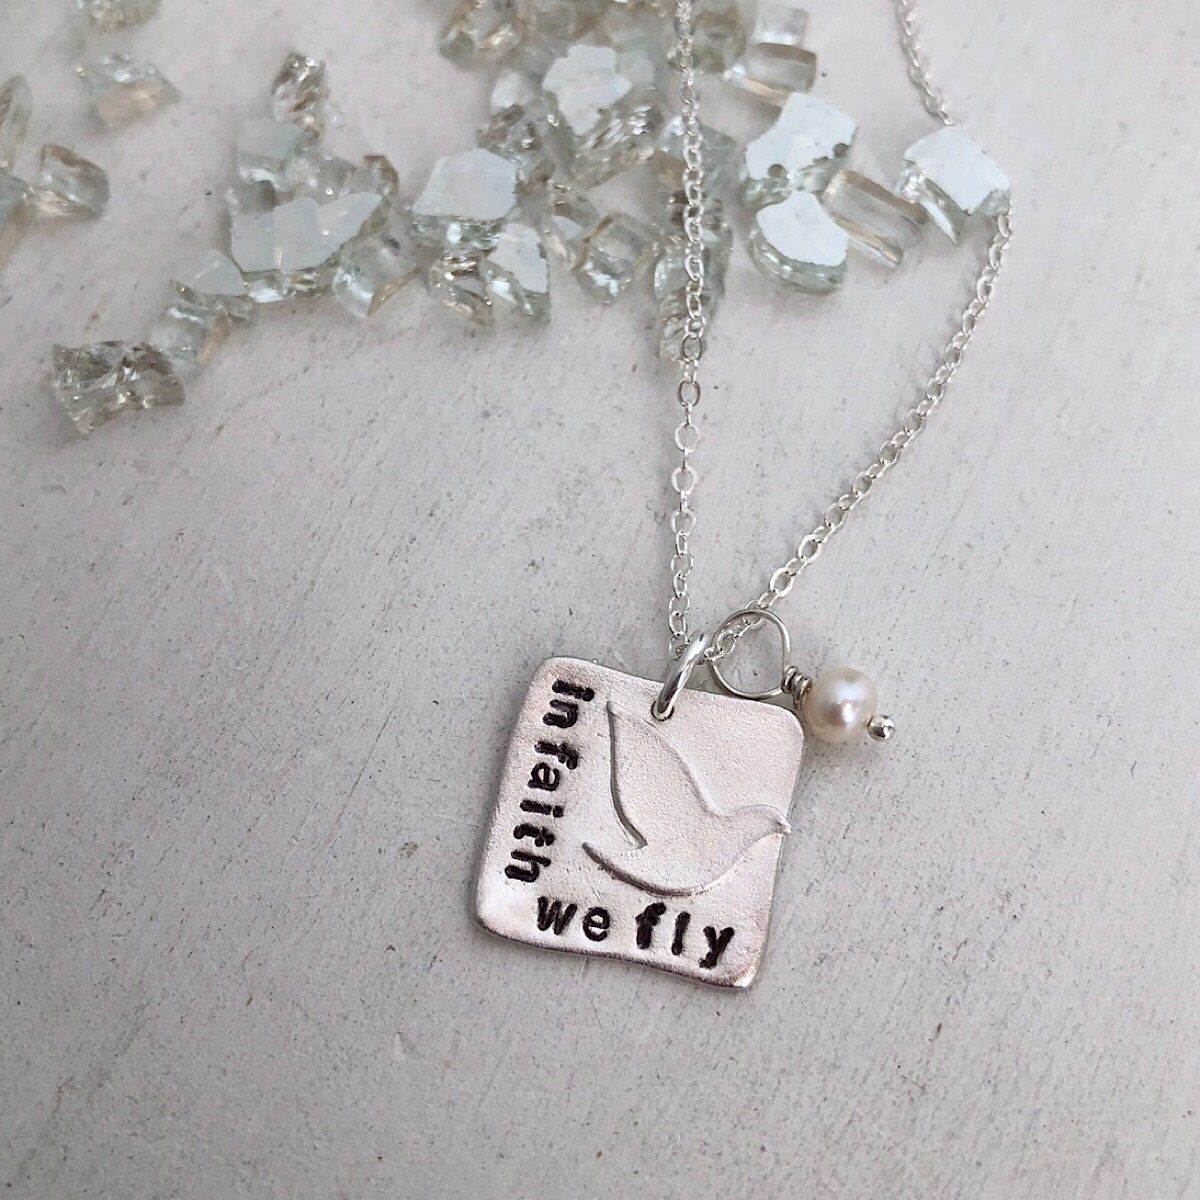 In Faith we Fly Necklace - IsabelleGraceJewelry